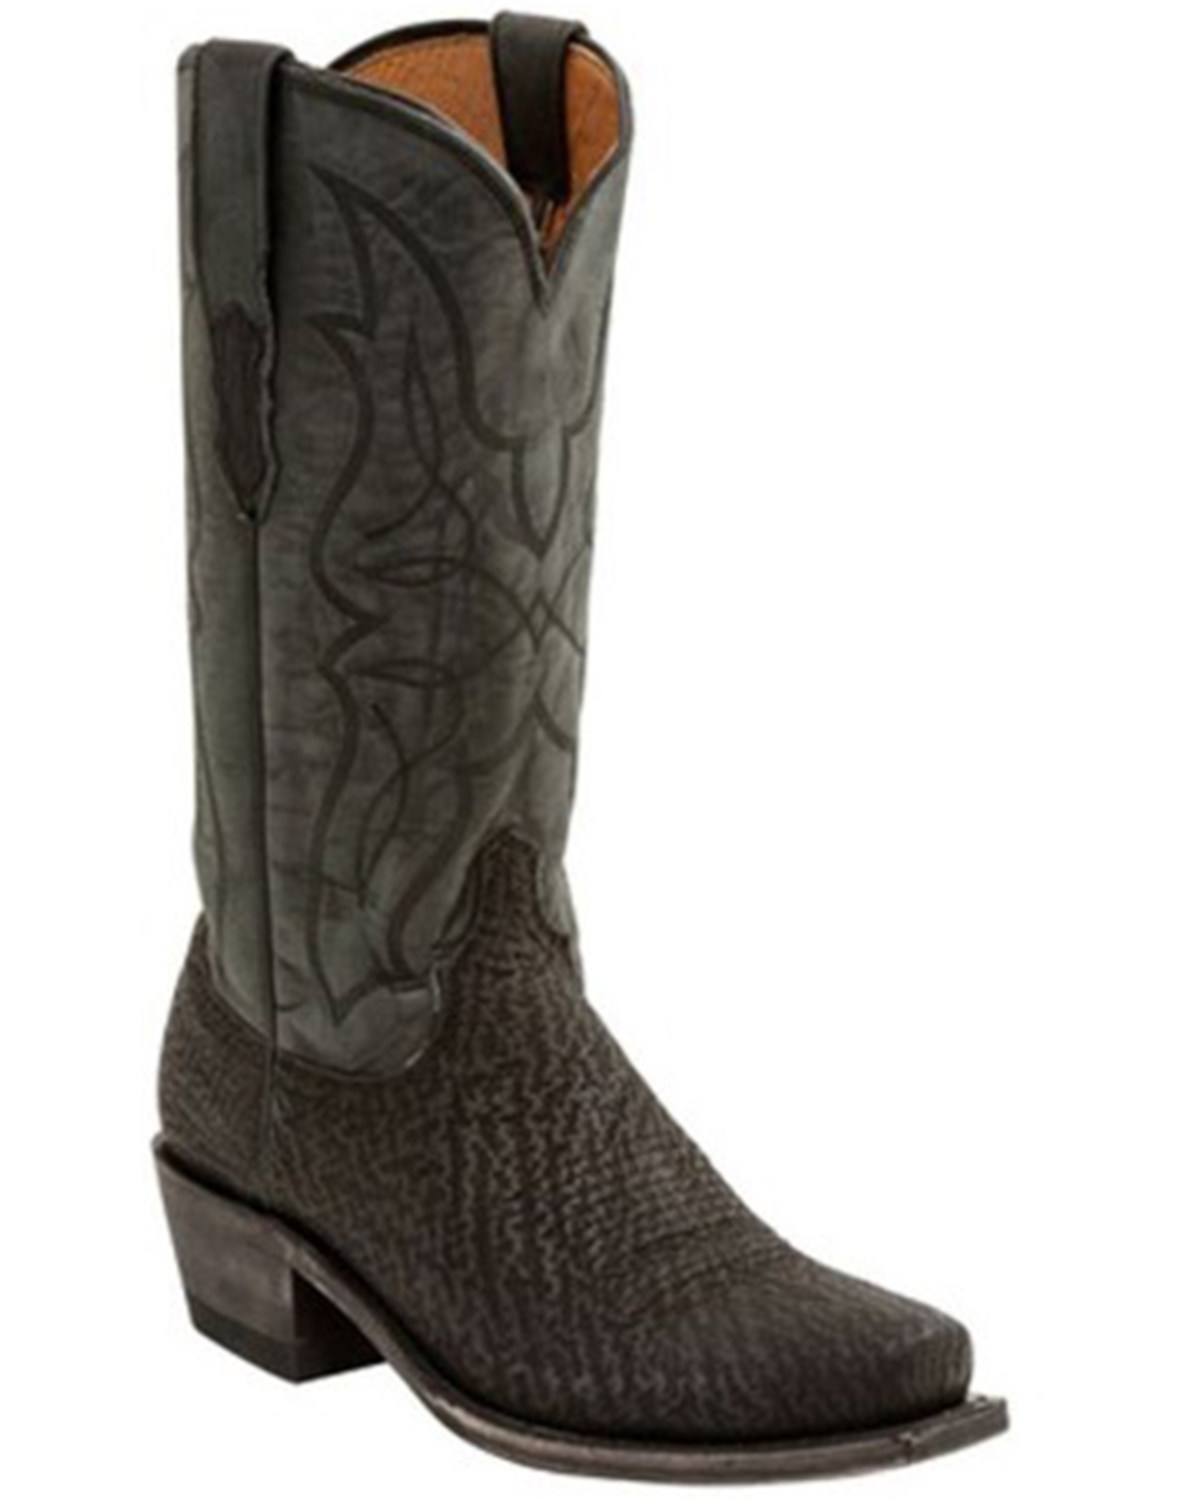 Lucchese Men's Handmade 1883 Carl Sanded Shark Western Boots - Square Toe